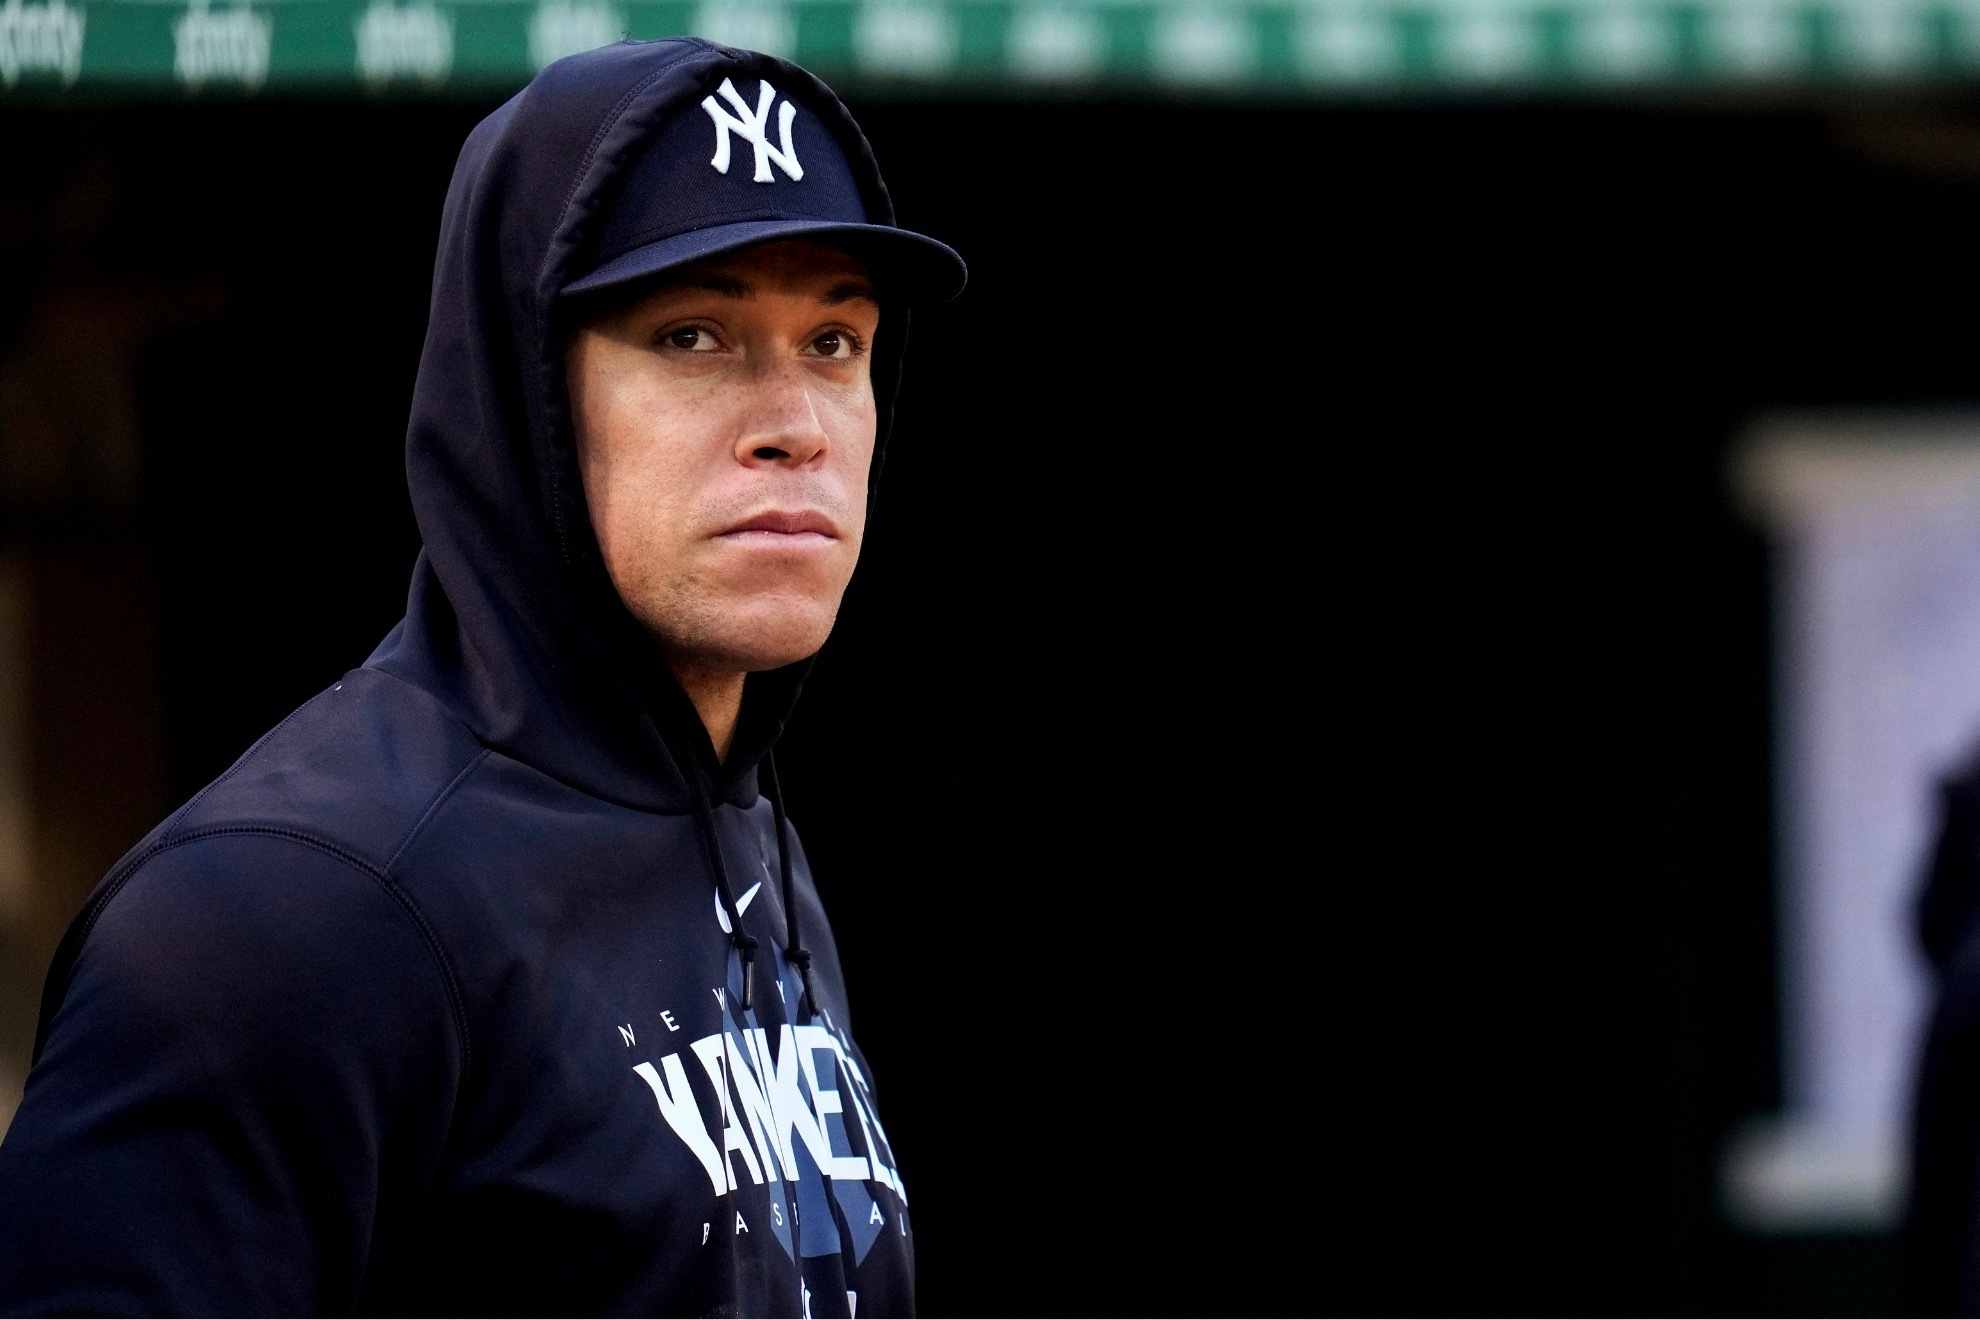 Aaron Judge is set to return to the Yankees lineup for the first time since June 3.